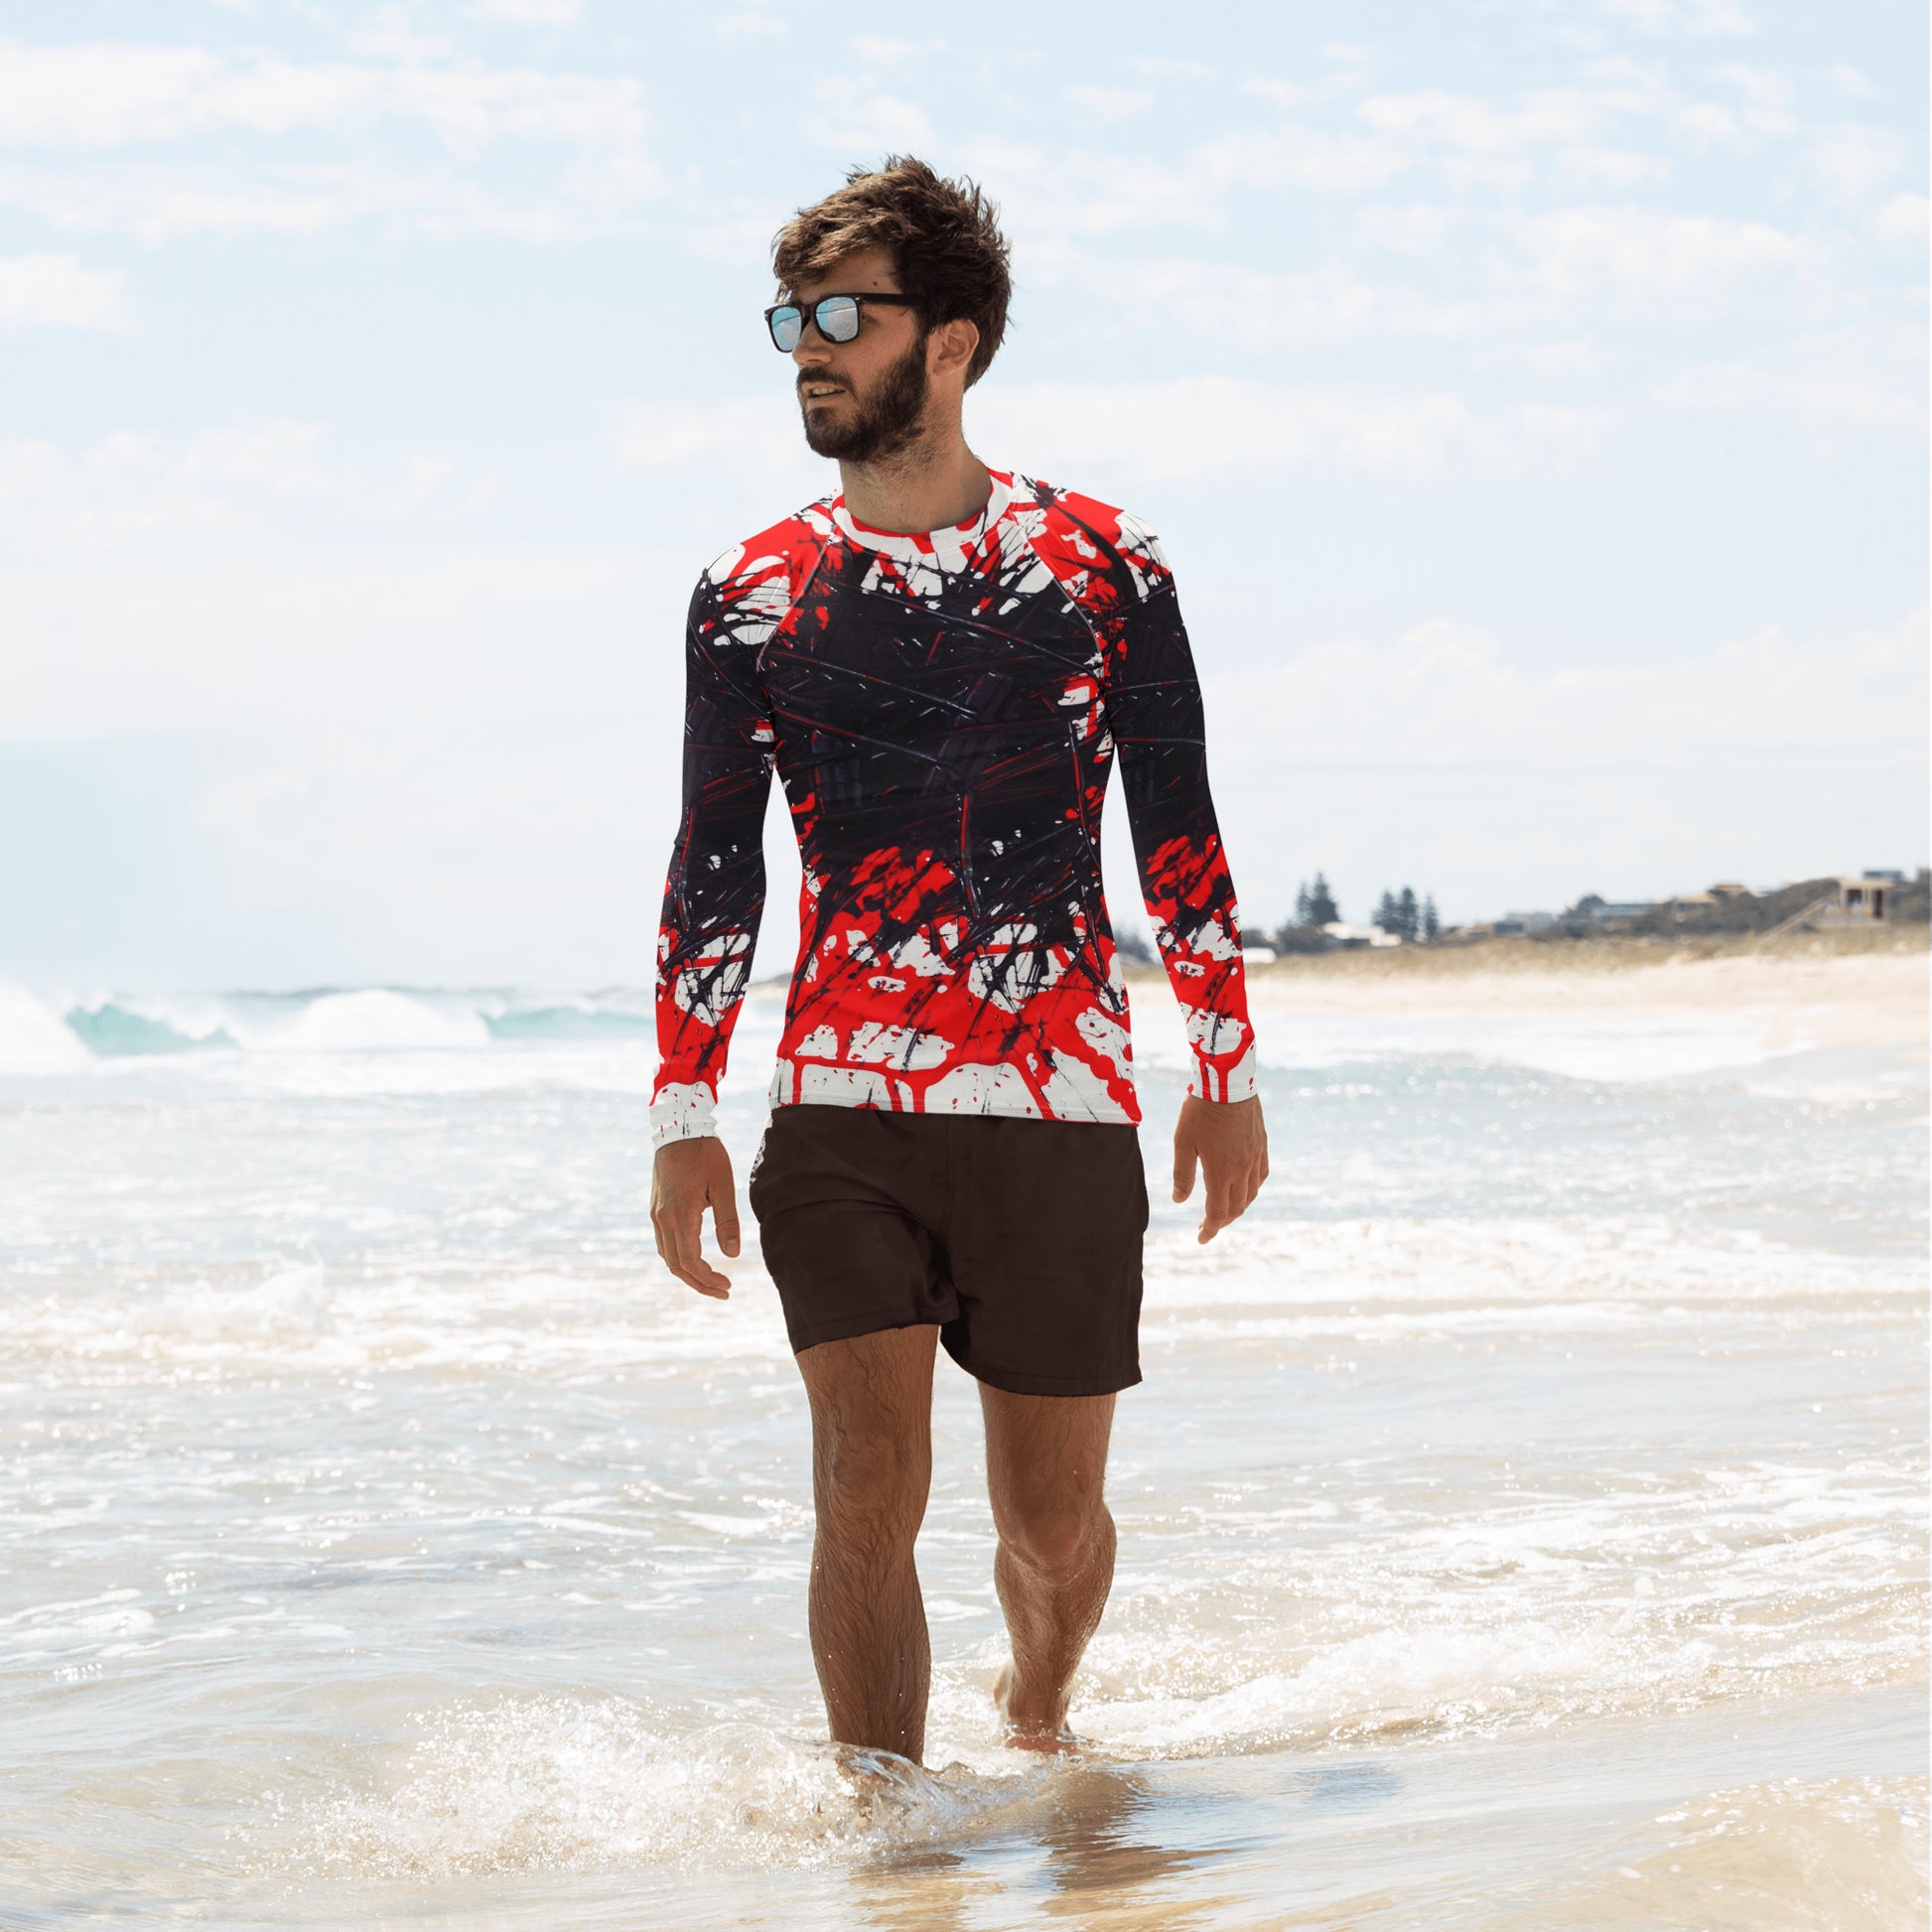 Abstract Men's Rash Guard - O By Onica Online Store